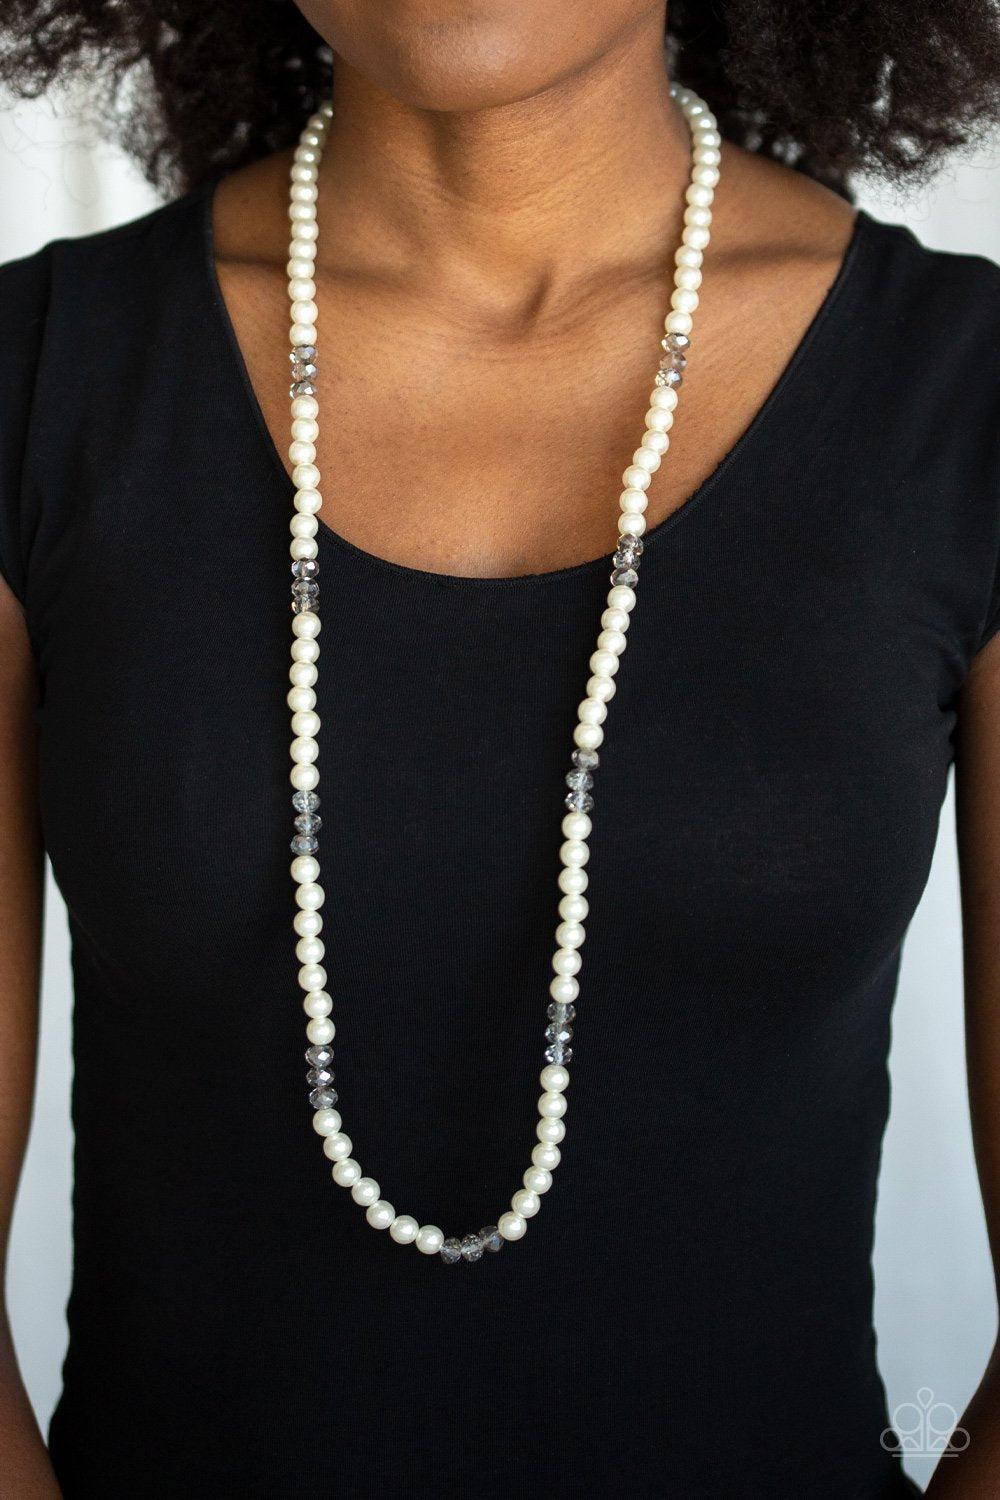 Girls Have More FUNDS White Pearl Necklace - Paparazzi Accessories - model -CarasShop.com - $5 Jewelry by Cara Jewels